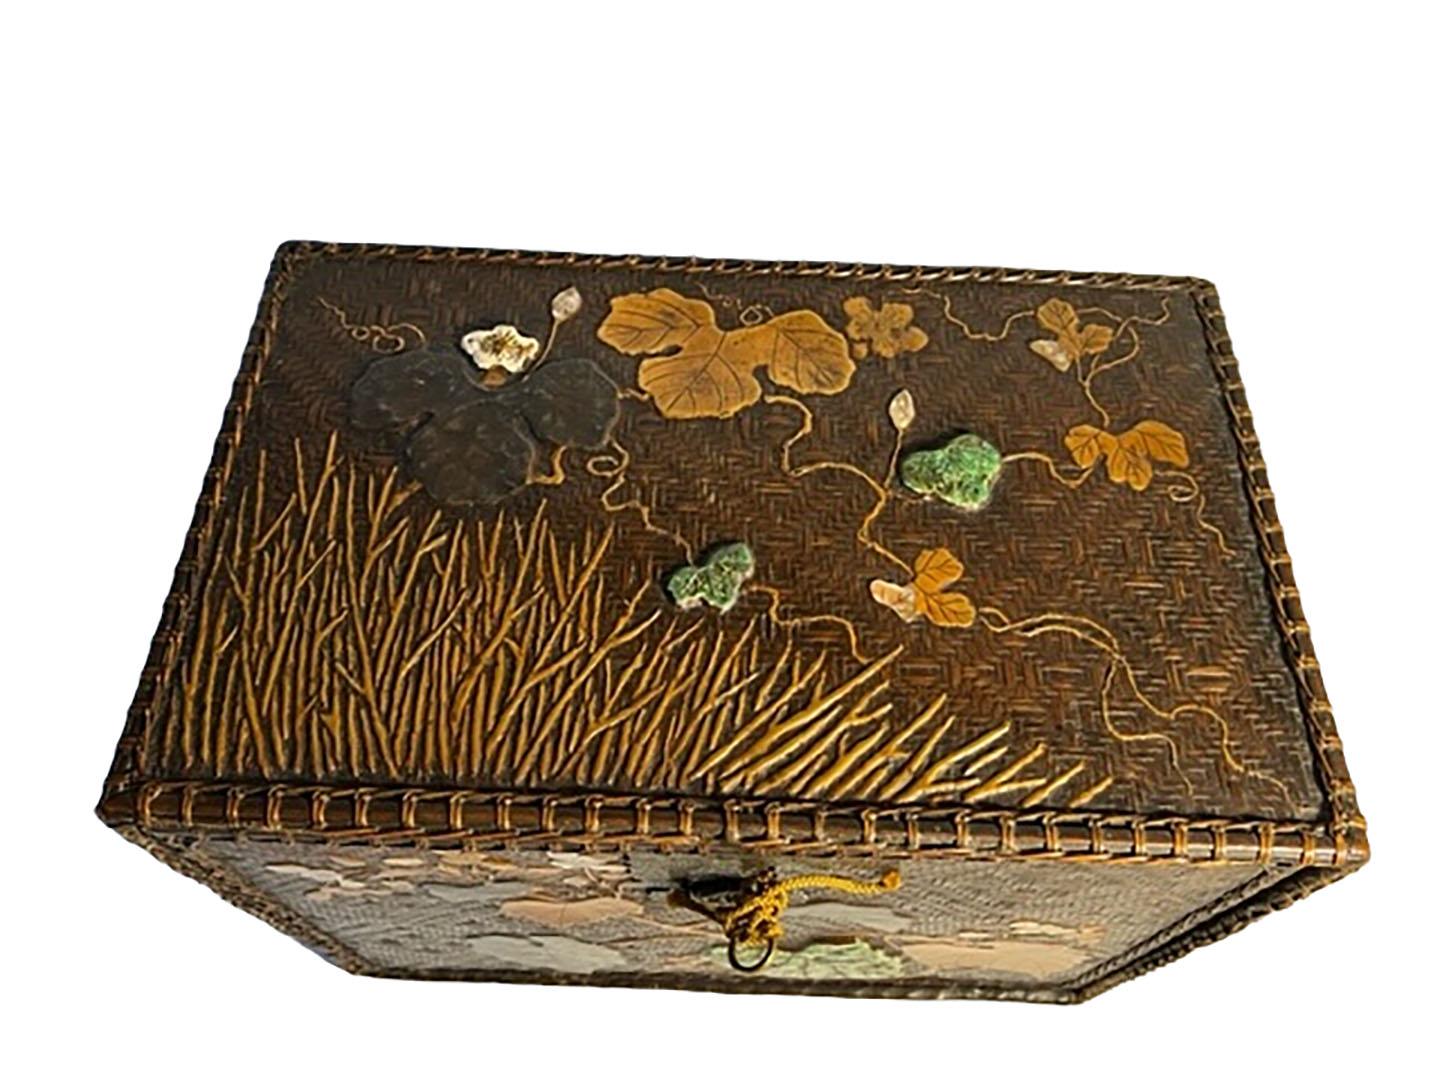 Japanese decorative woven box. Late Edo/Early Meiji Japanese box, with
mother-of-pearl and ceramic inlay in autumnal leaf motif. Complete with working lock and key. Circa 1790-1820.